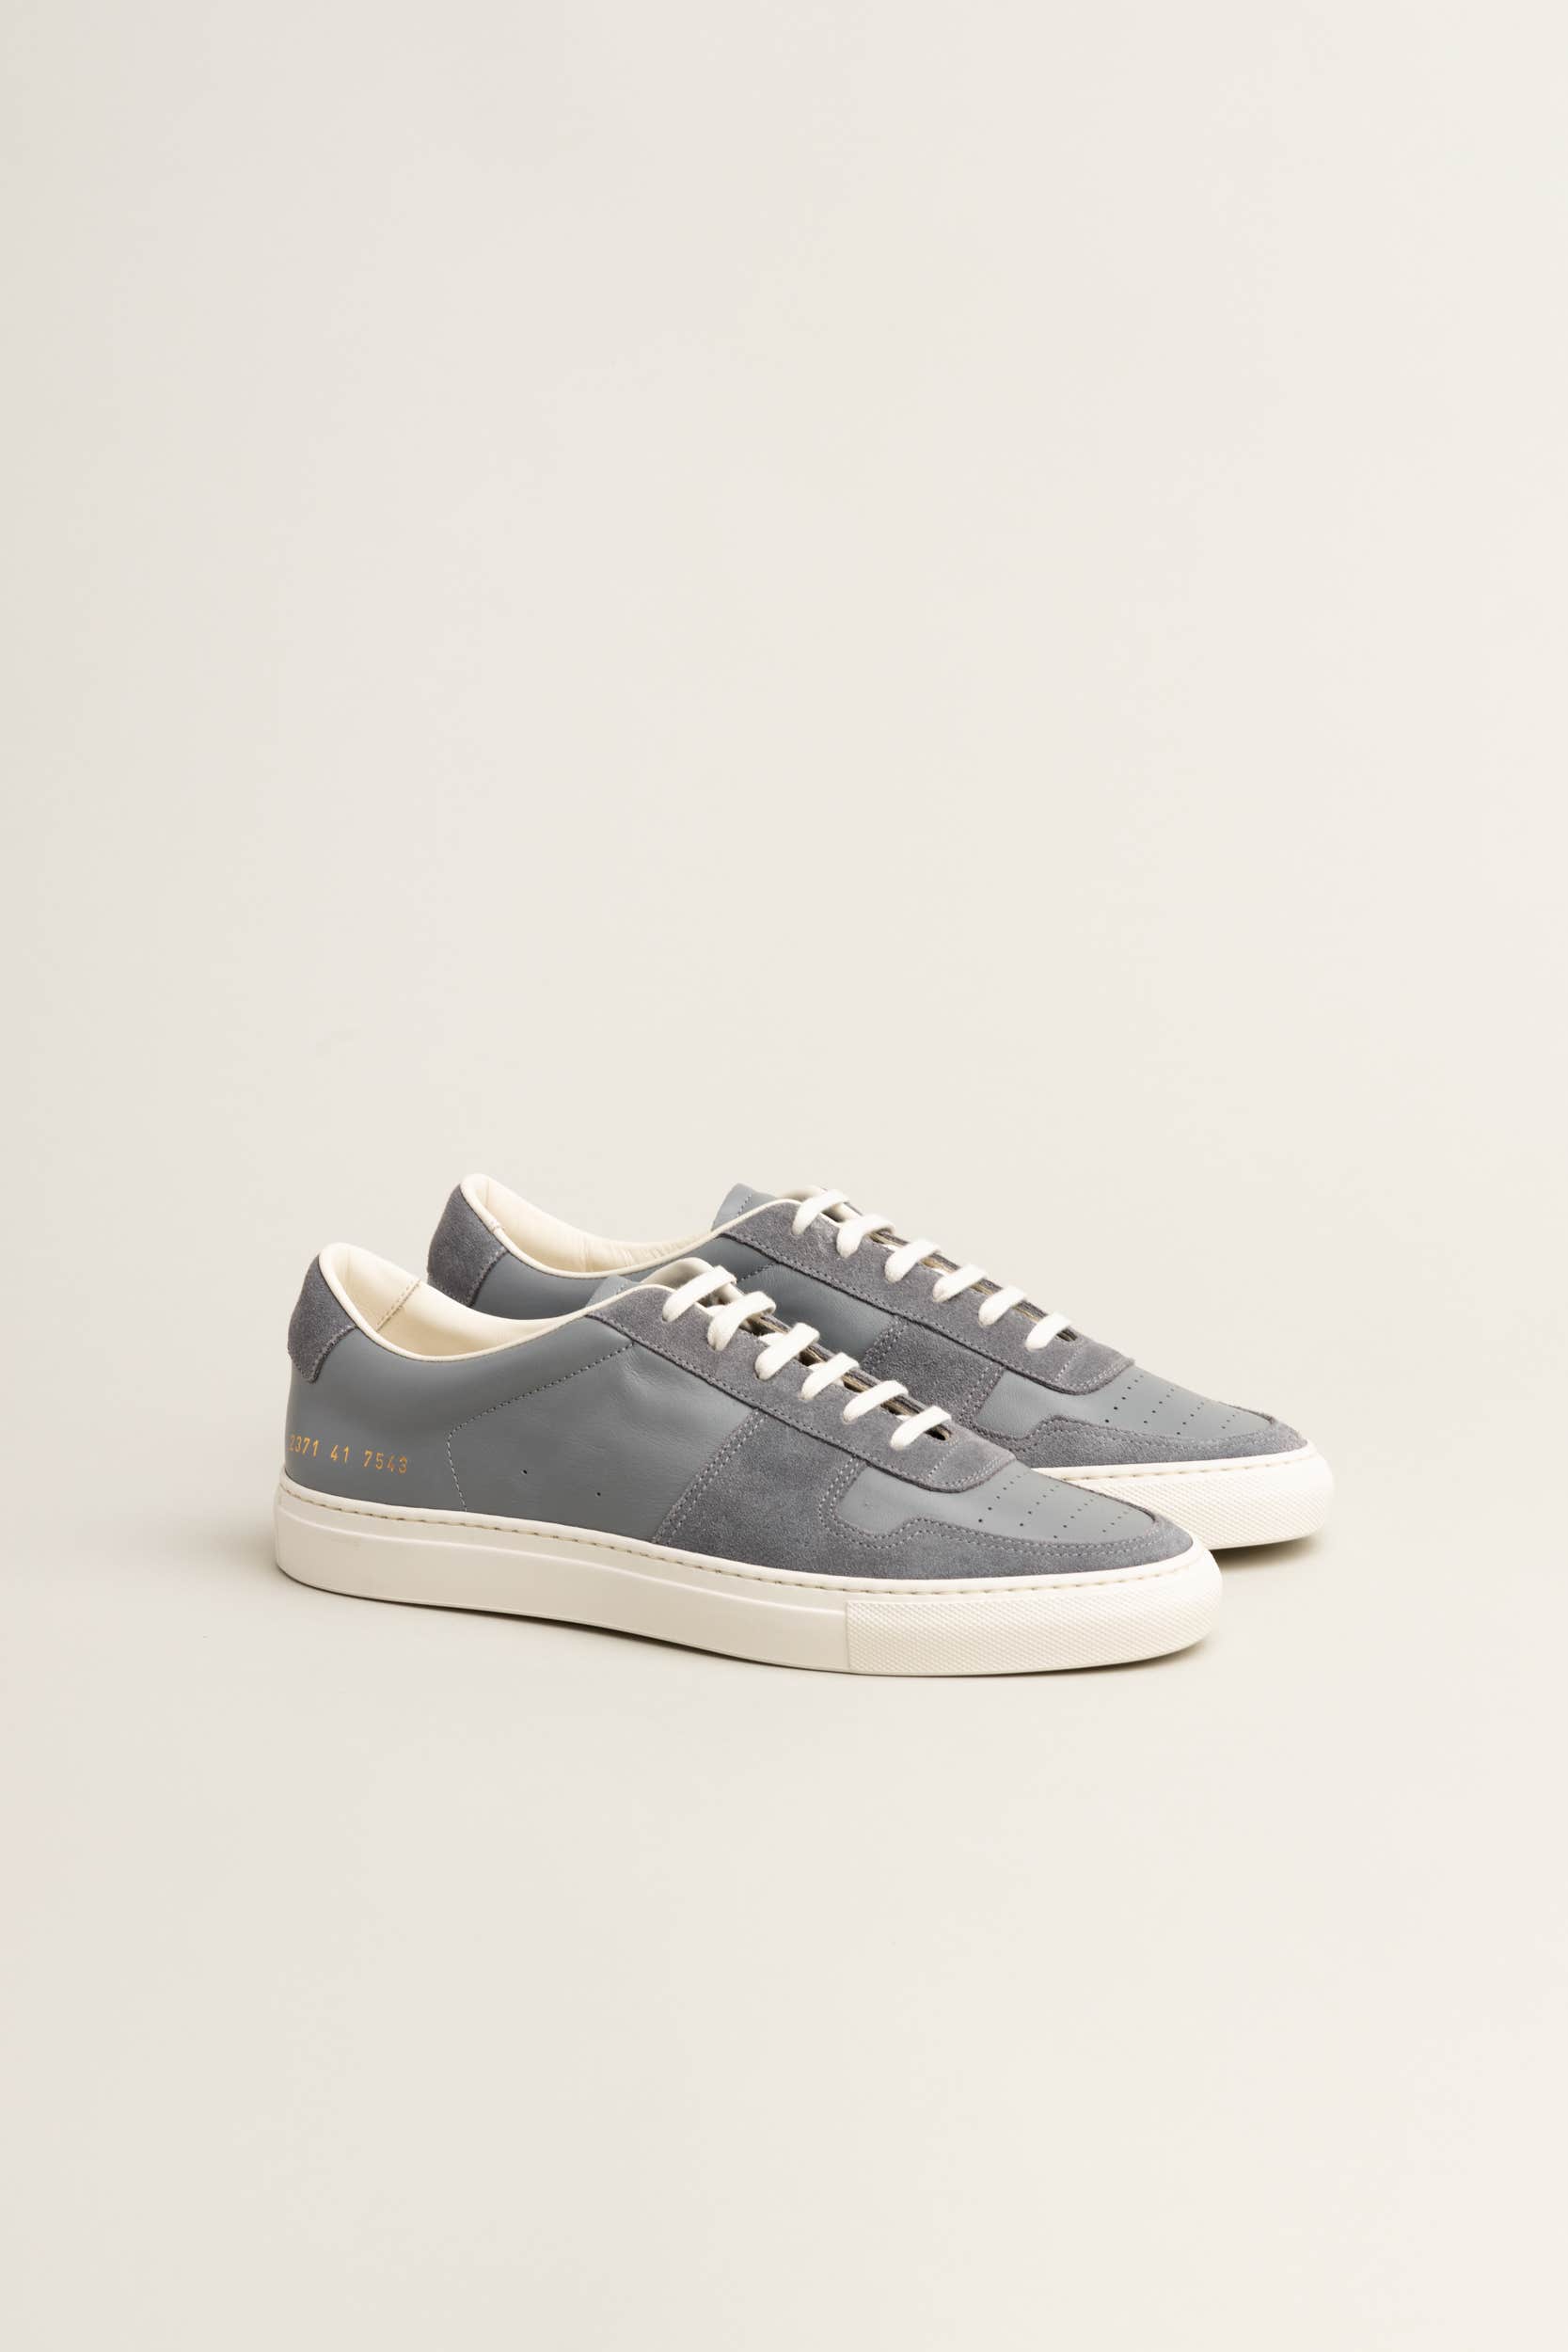 Grey Bball Suede-Trimmed Leather Sneakers